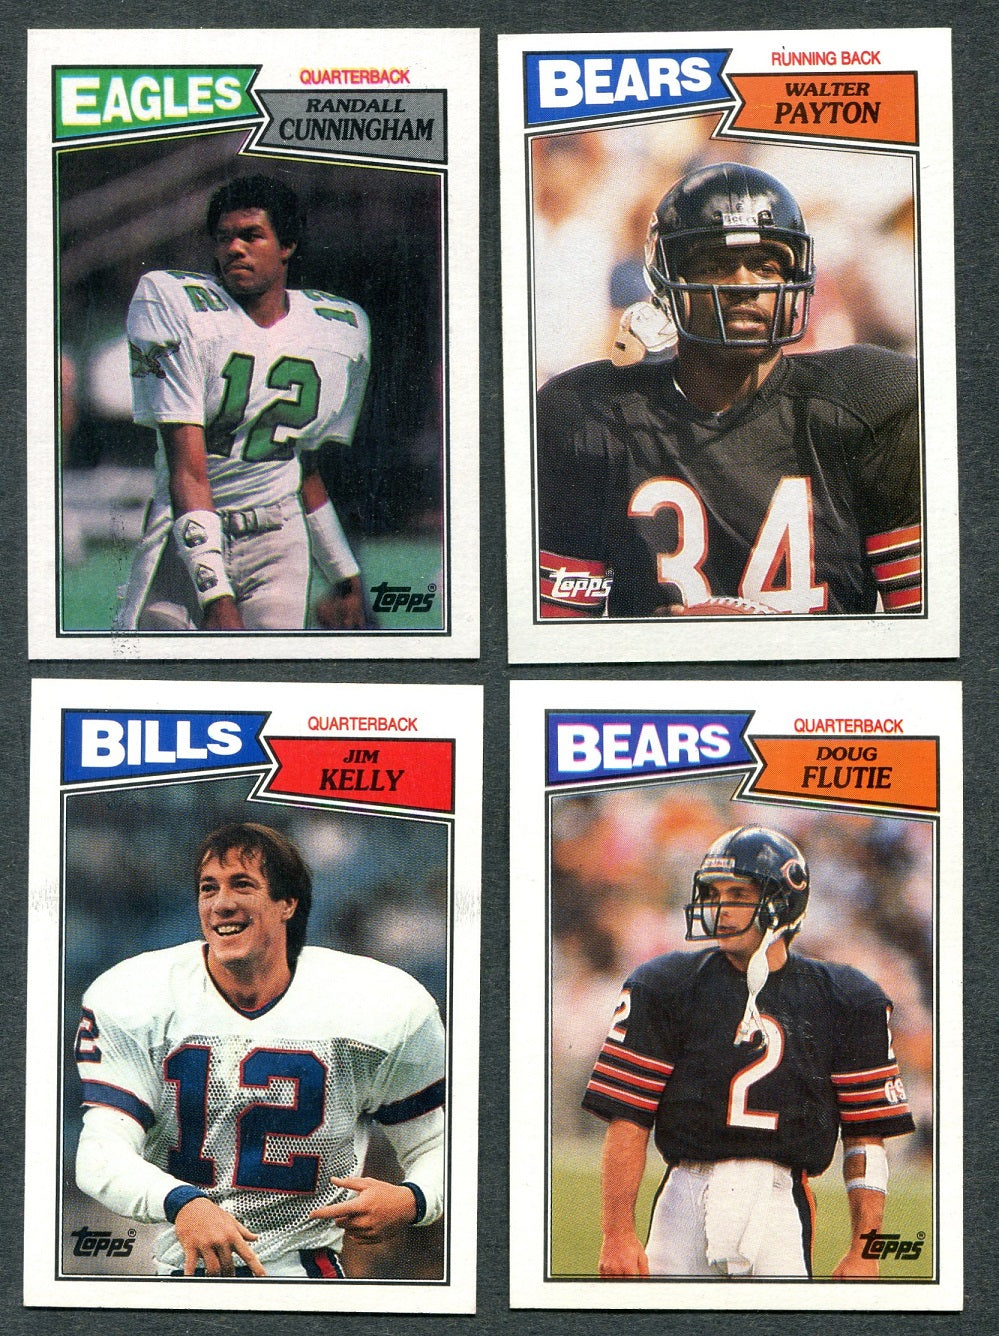 1987 Topps Football Complete Set NM NM/MT (396) (24-330)